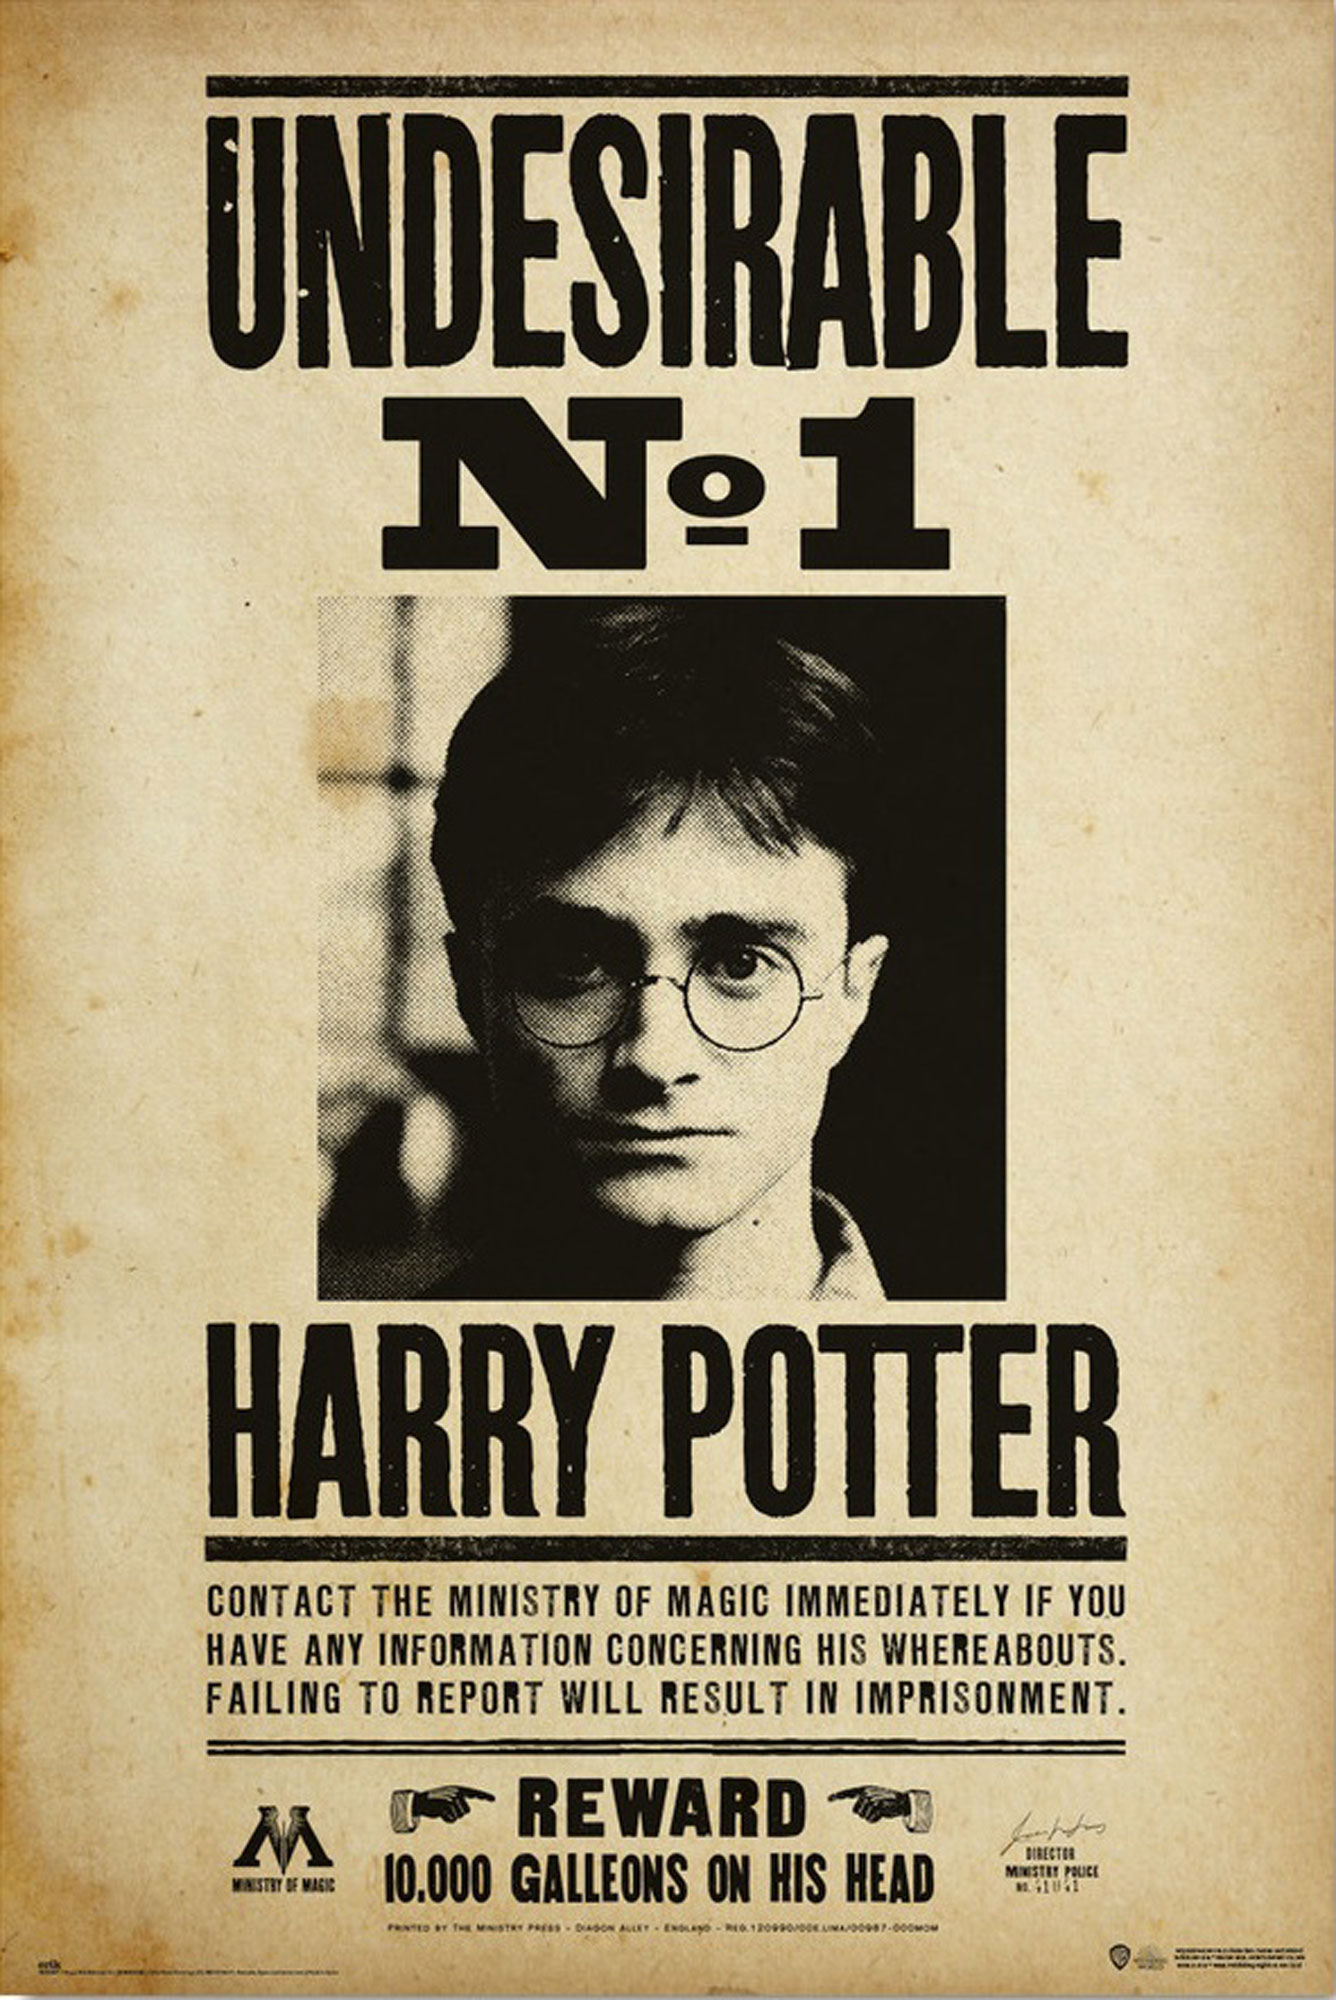 Harry Potter - No Undesirable 1